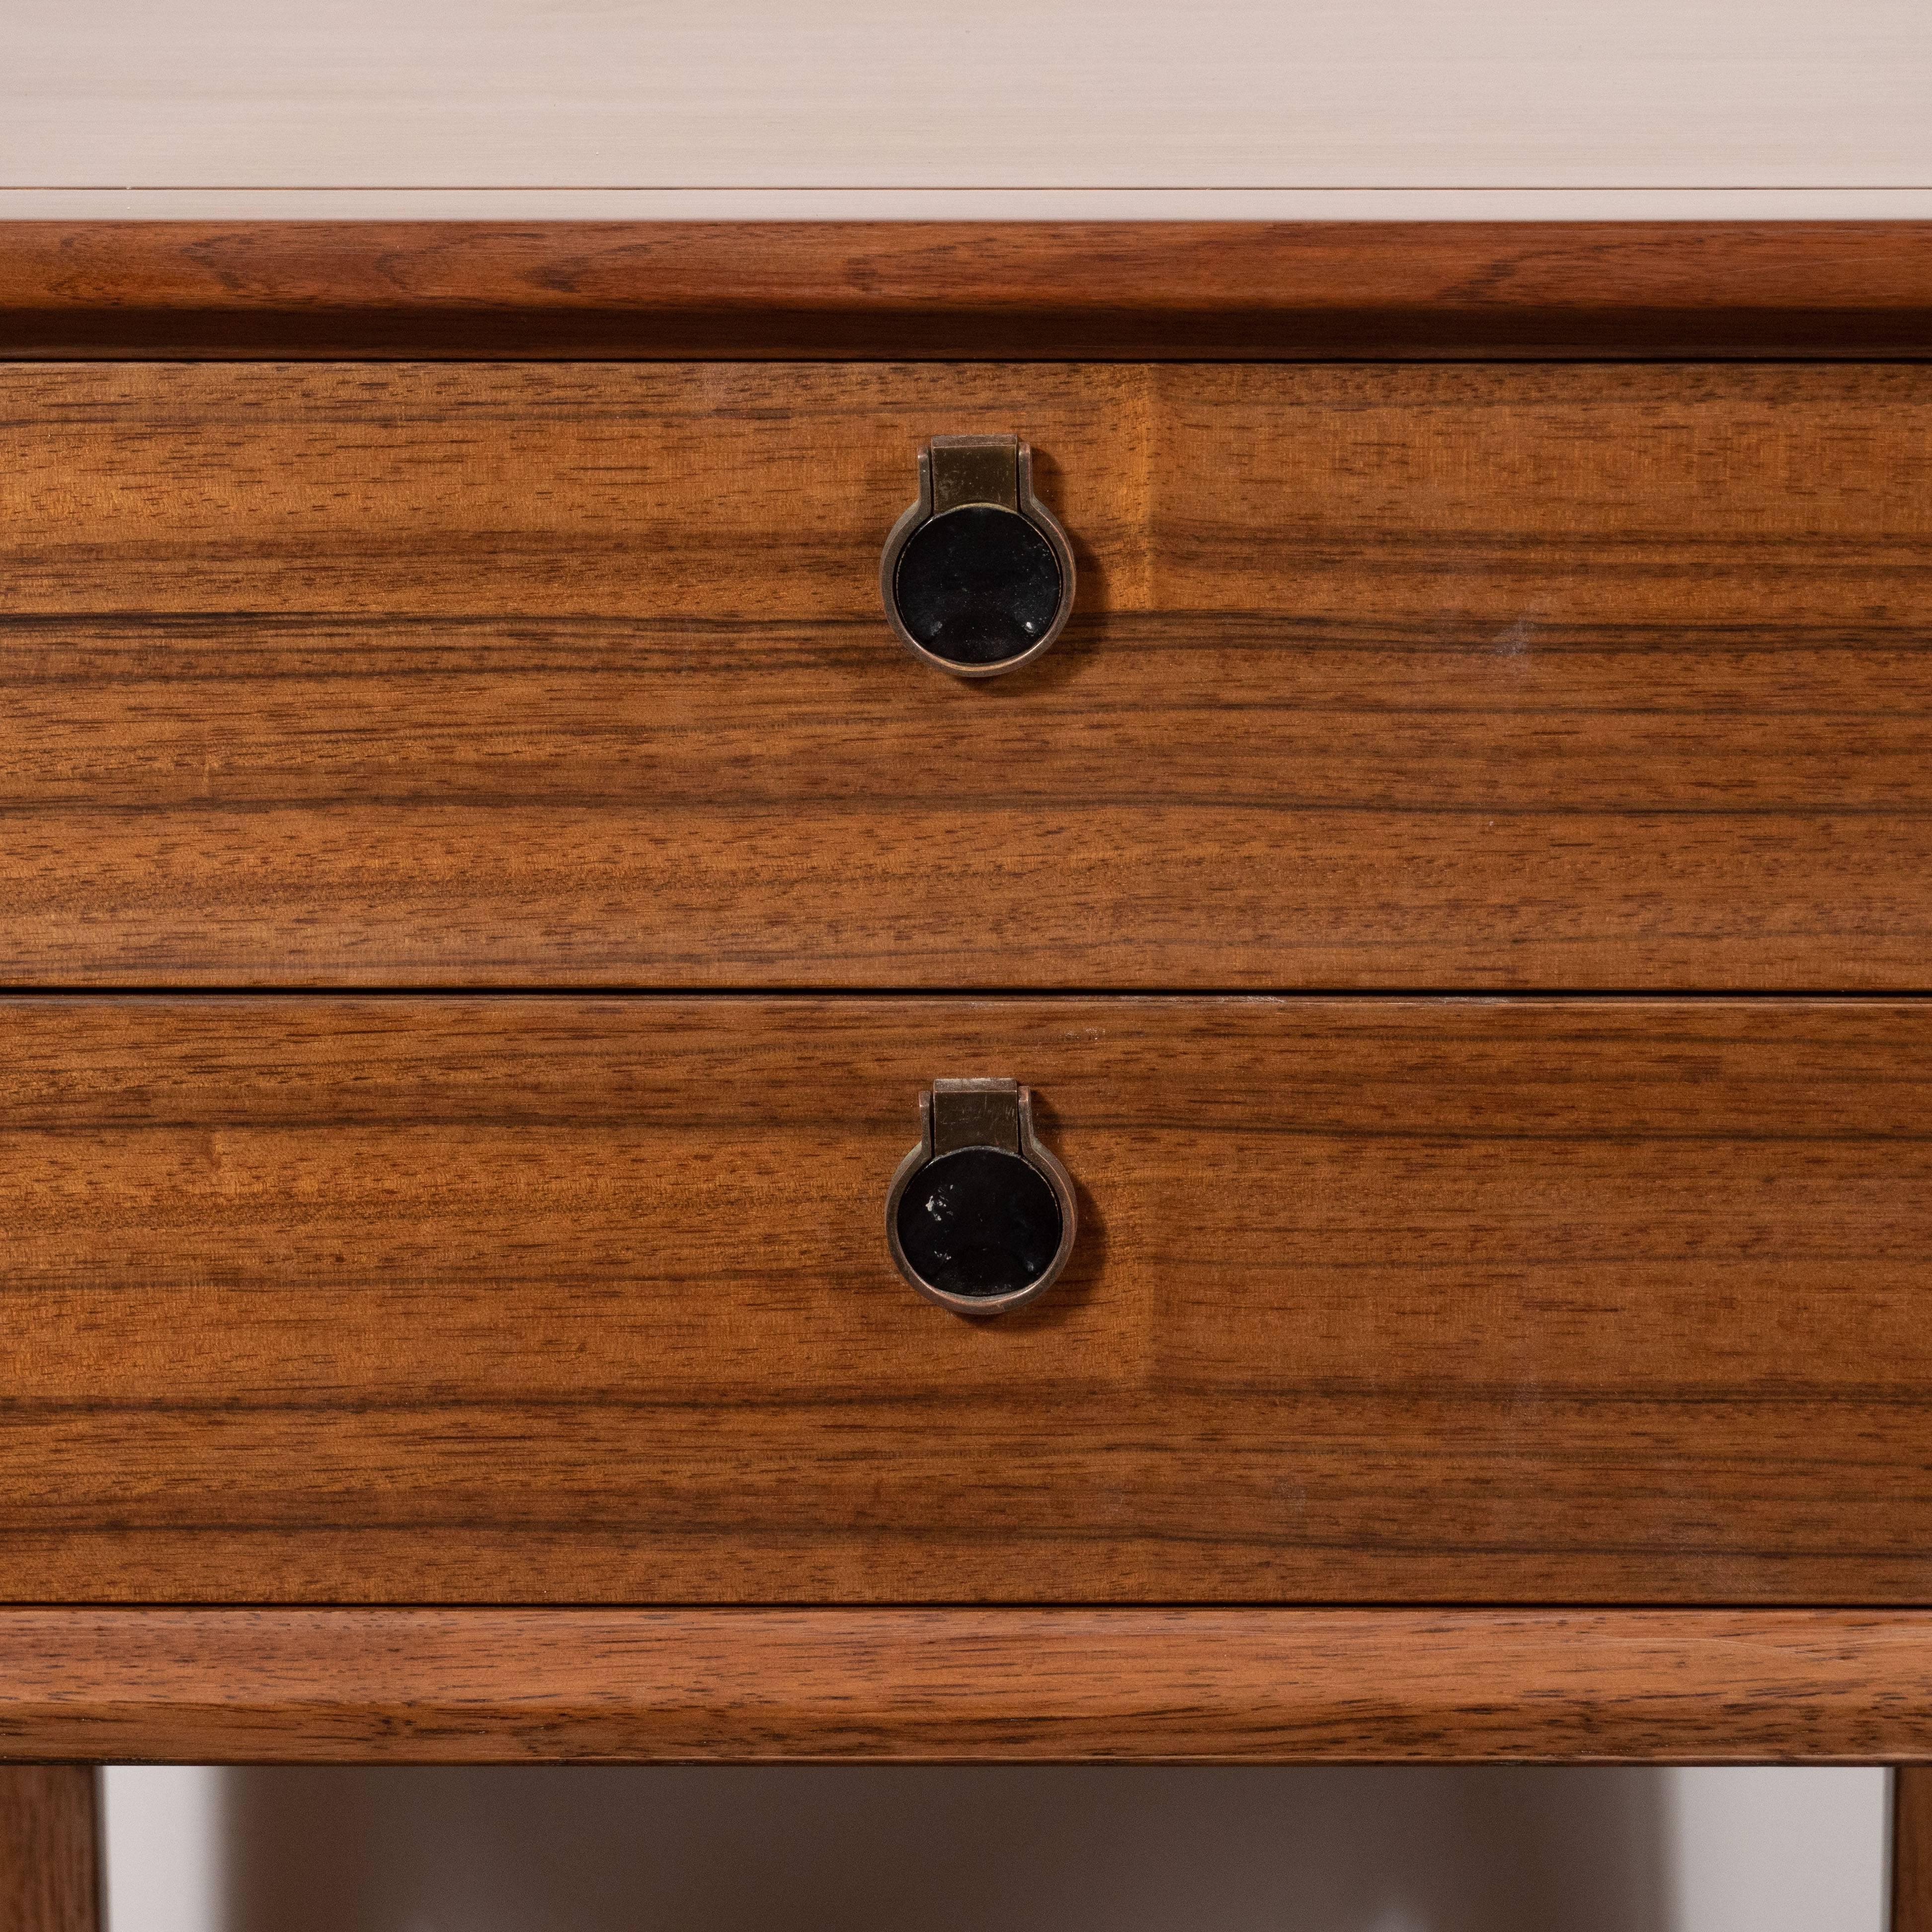 American Pair of Mid-Century Modern Bookmatched Walnut Nightstands with Brass Pulls